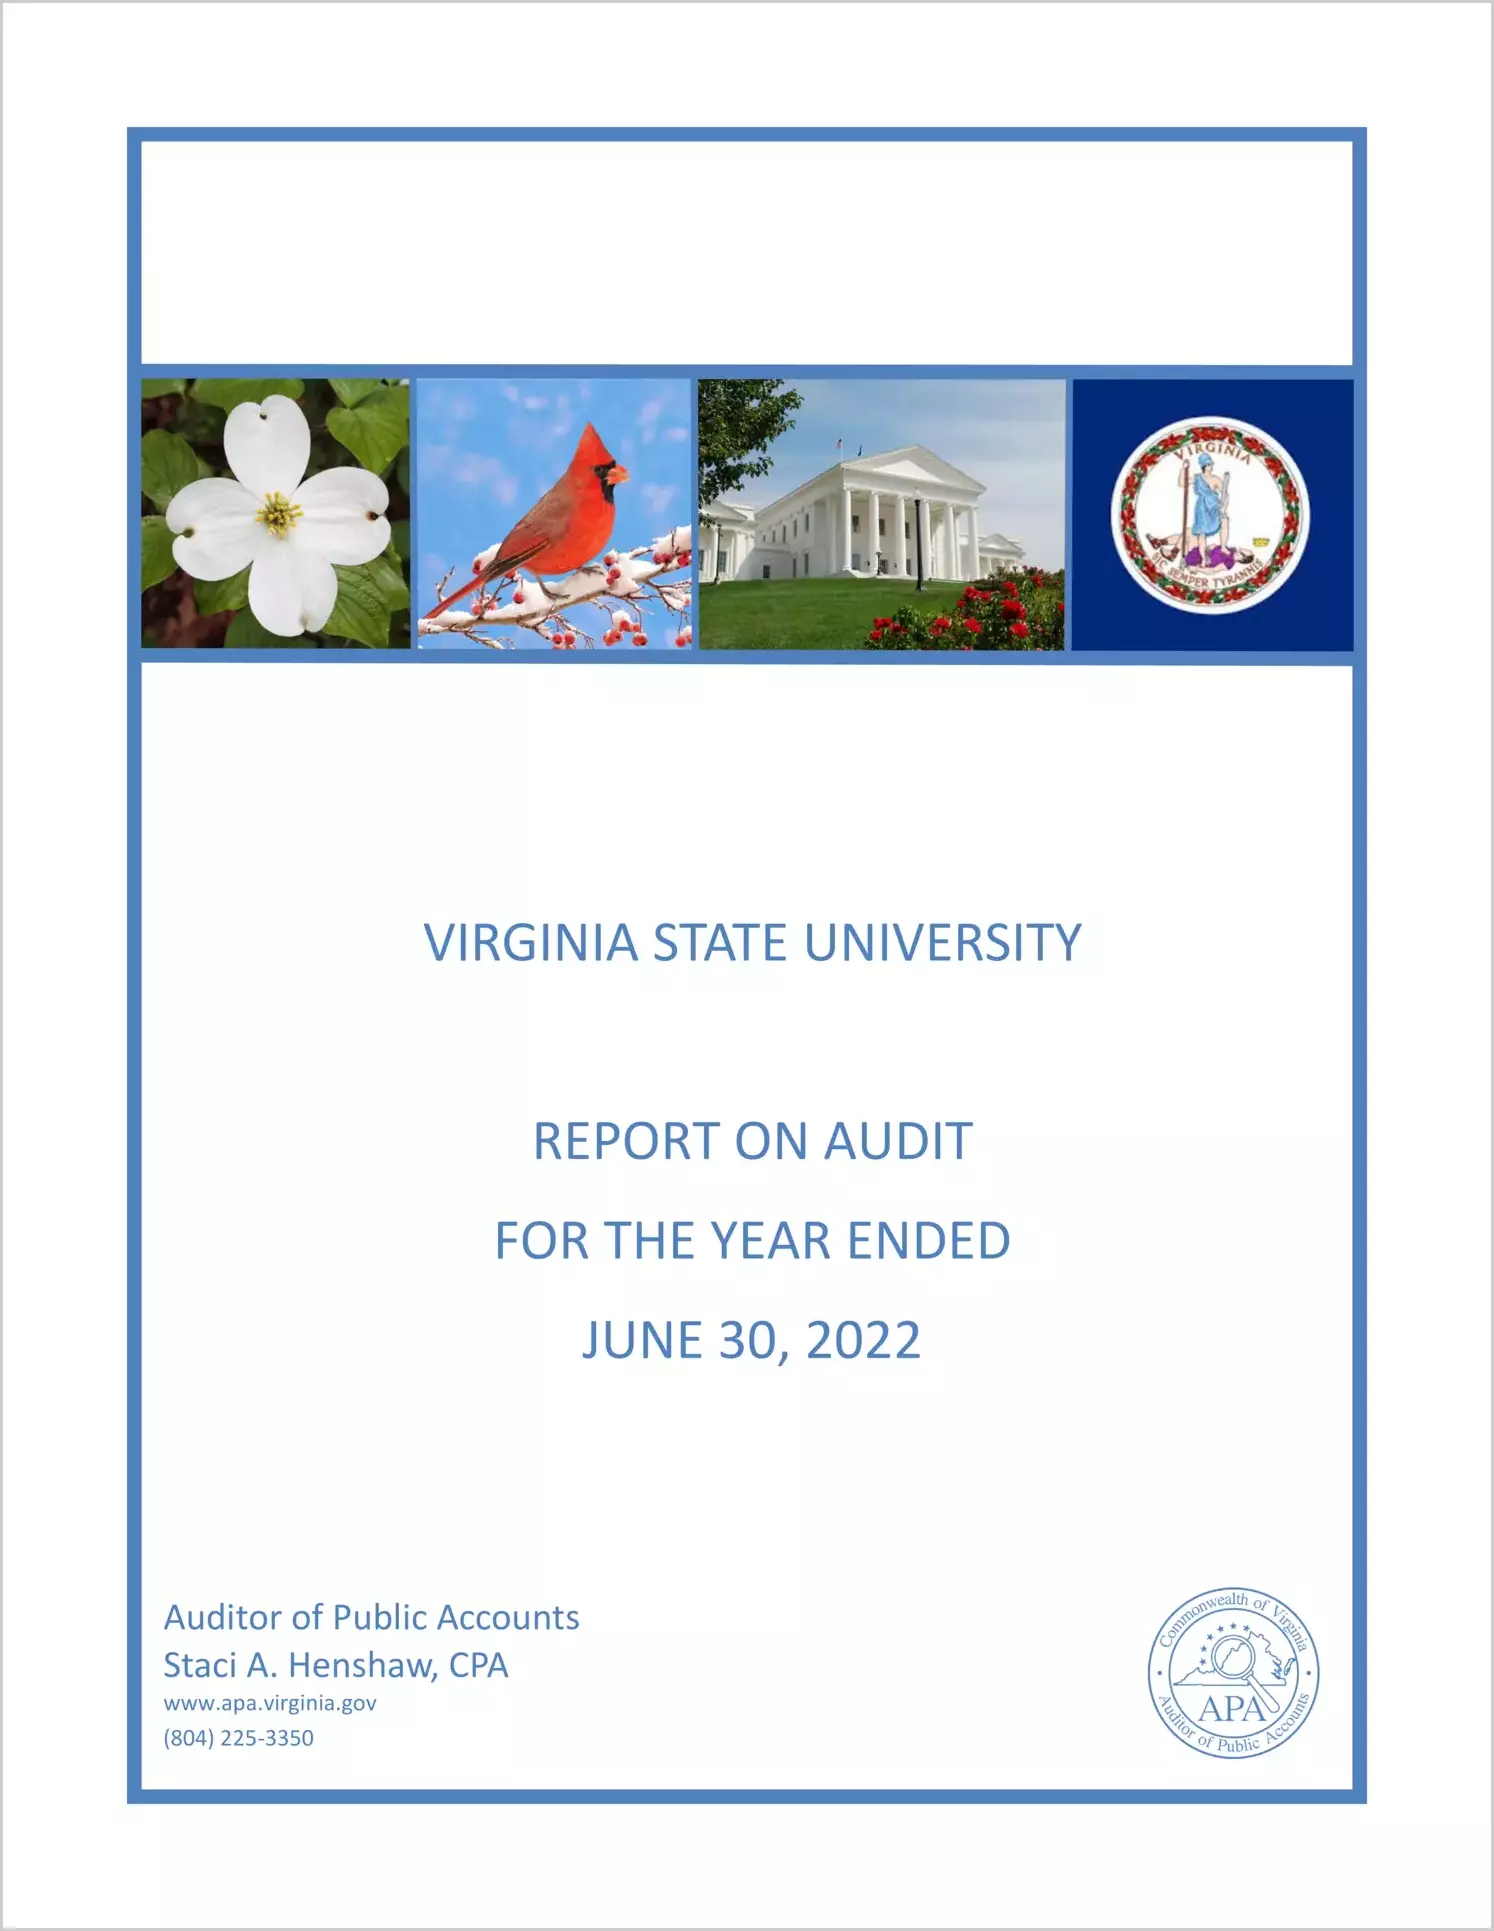 Virginia State University for the year ended June 30, 2022